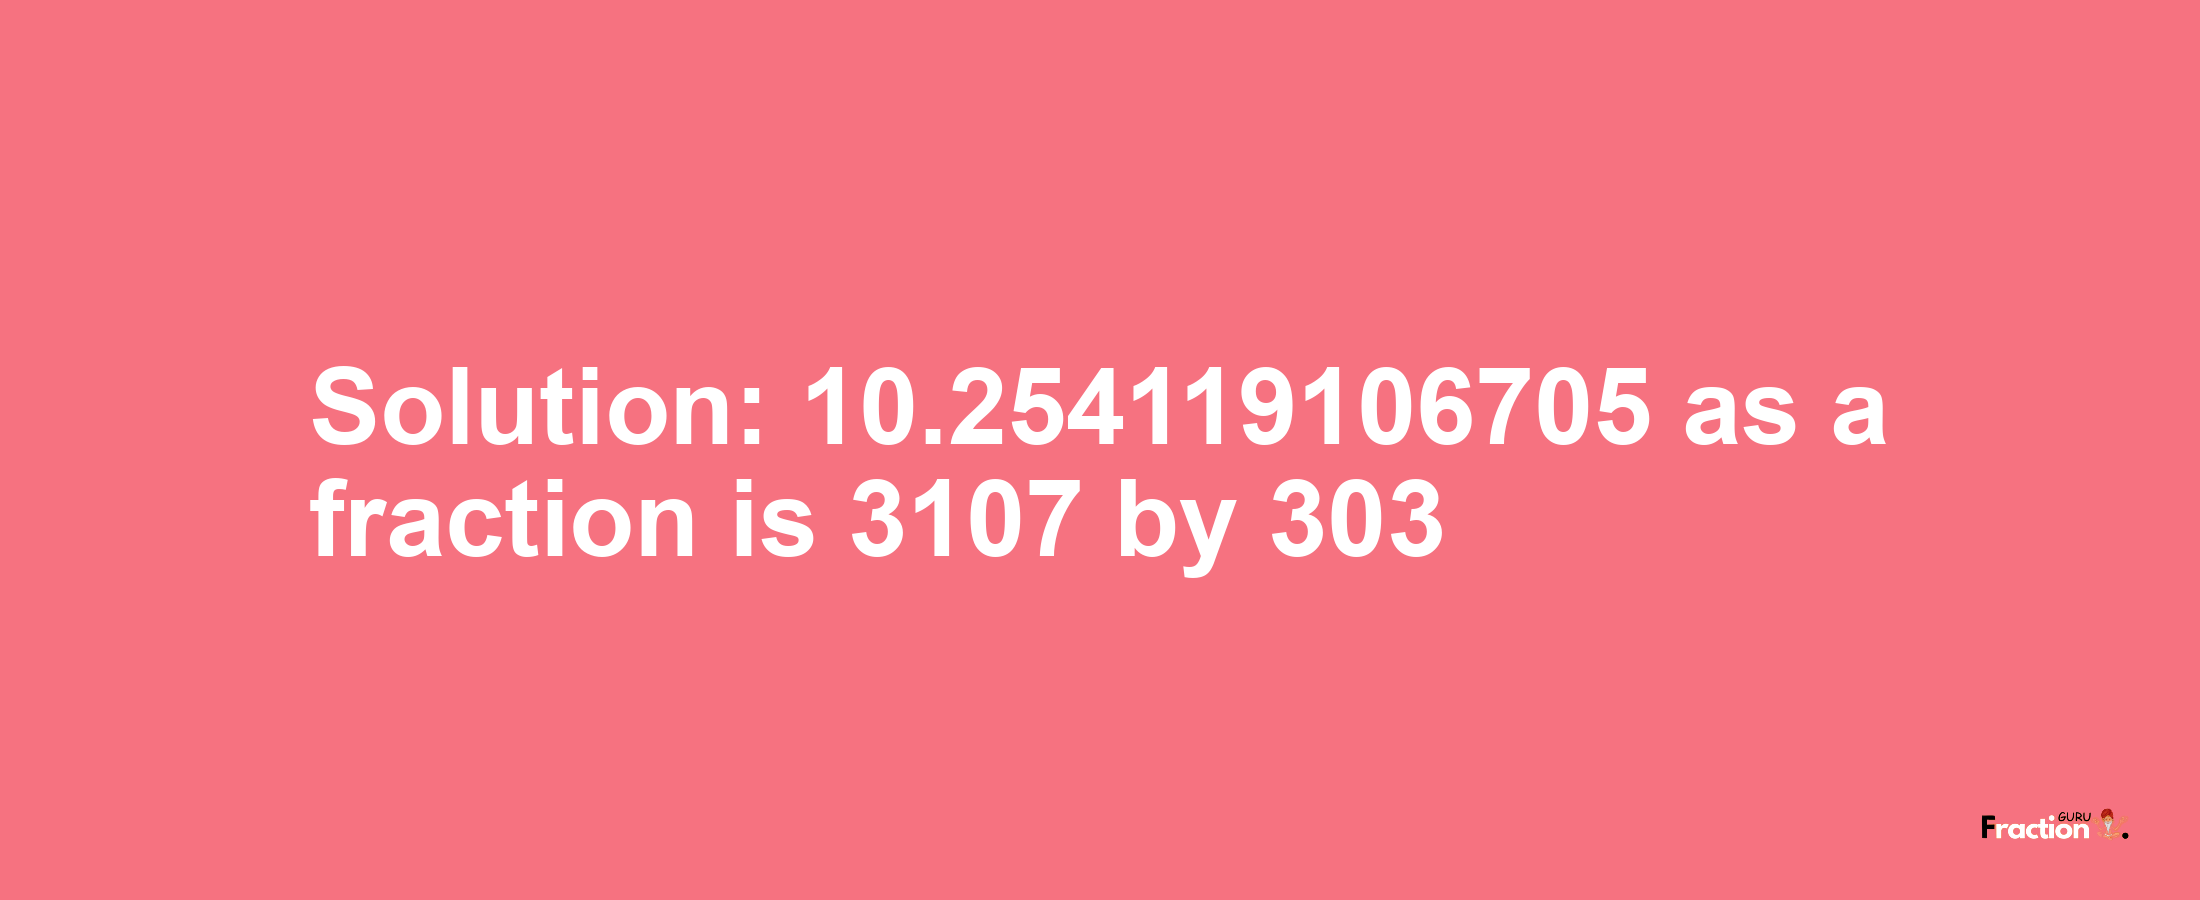 Solution:10.254119106705 as a fraction is 3107/303